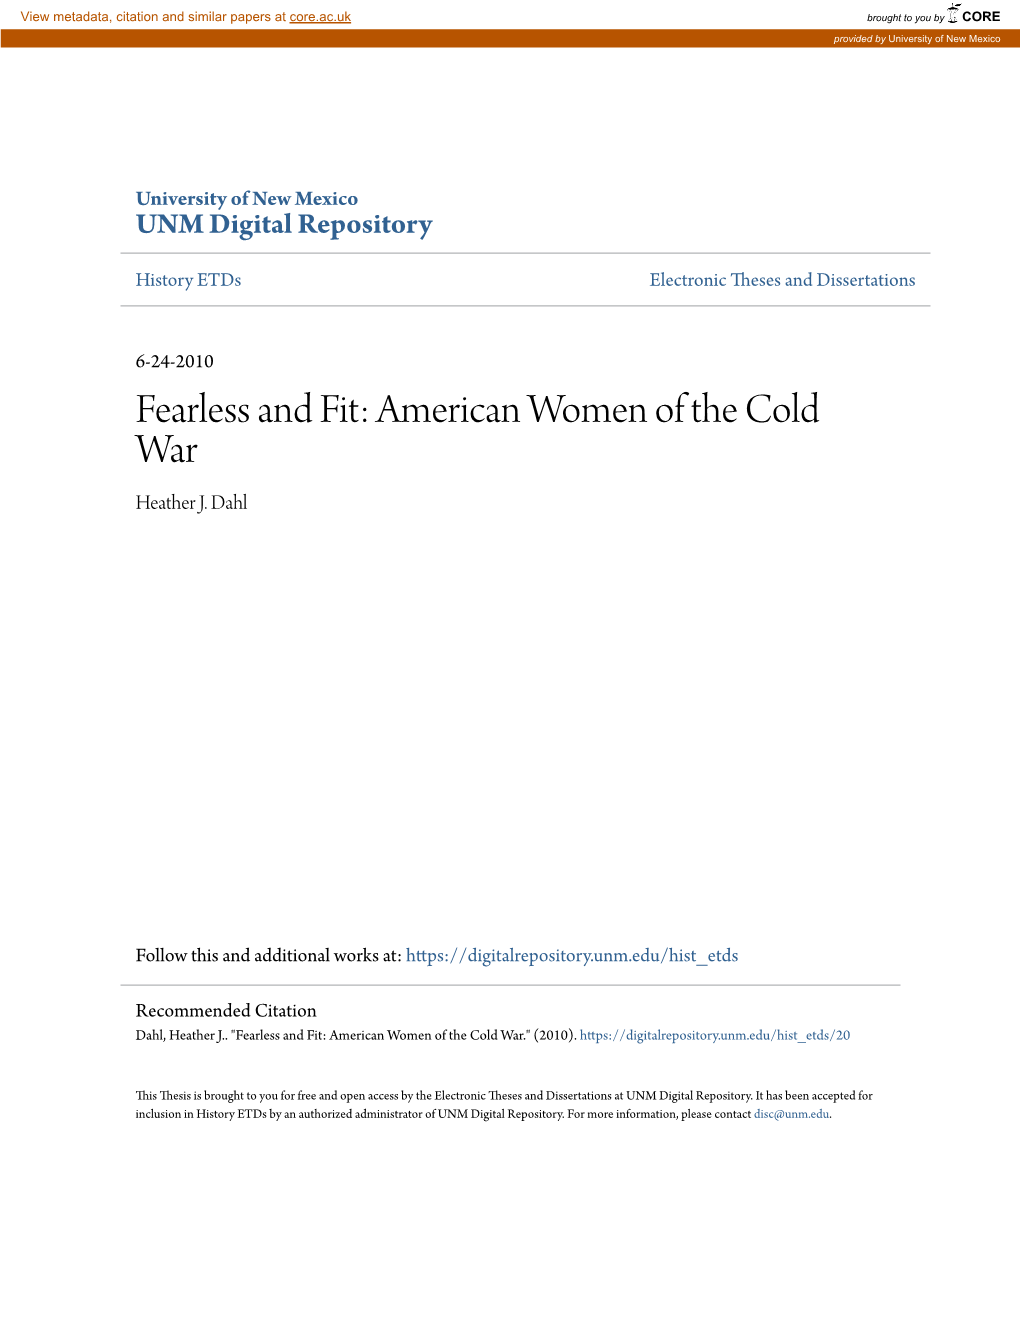 American Women of the Cold War Heather J